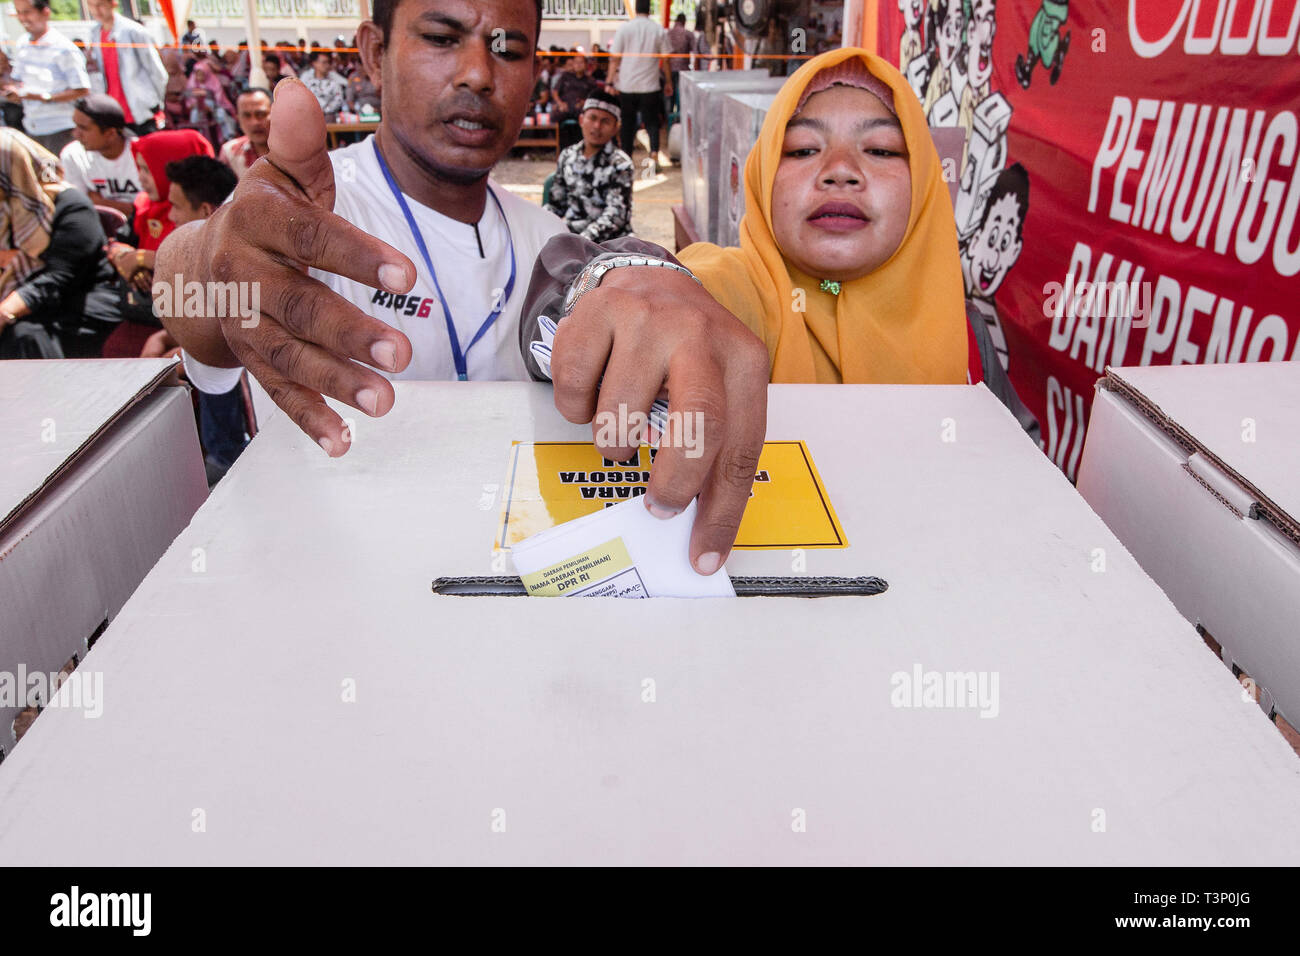 Lhokseumawe, Indonesia. 11th Apr, 2019. A woman seen casting her ballot during pre-election drill for president, vice-presidential candidates and legislative candidates in Lhokseumawe, Aceh province, Indonesia. Elections in Indonesia will take place next week on Wednesday April 17, 2019. Credit: SOPA Images Limited/Alamy Live News Stock Photo